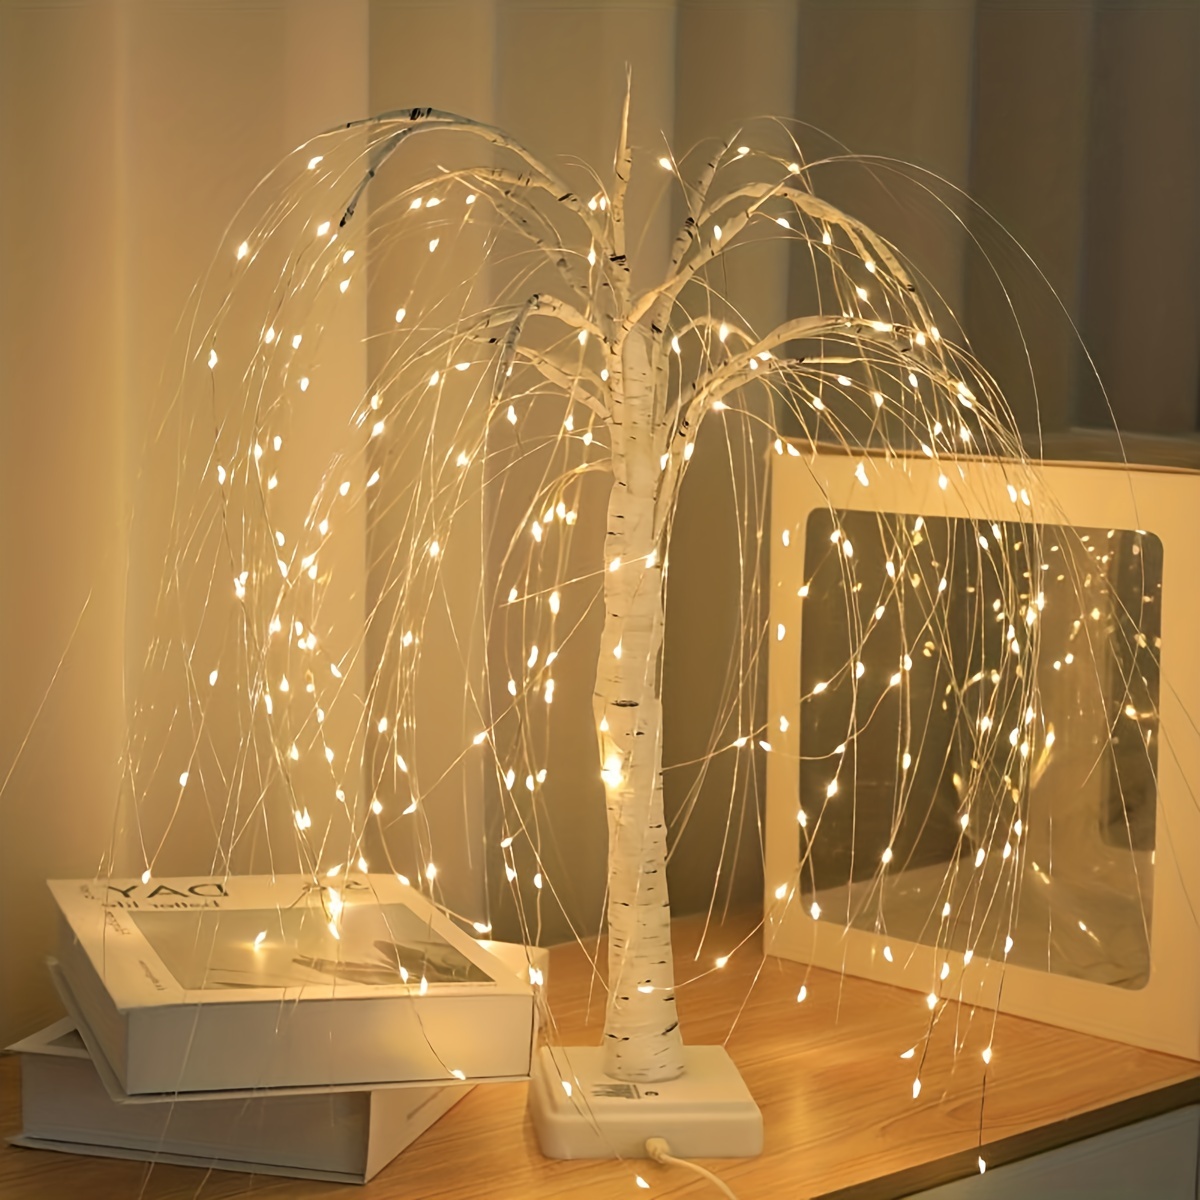 Willow and Resin Light Sculpture Tree Branch Lamp Willow Anniversary Gifts  Resin Lamp 9th Anniversary 